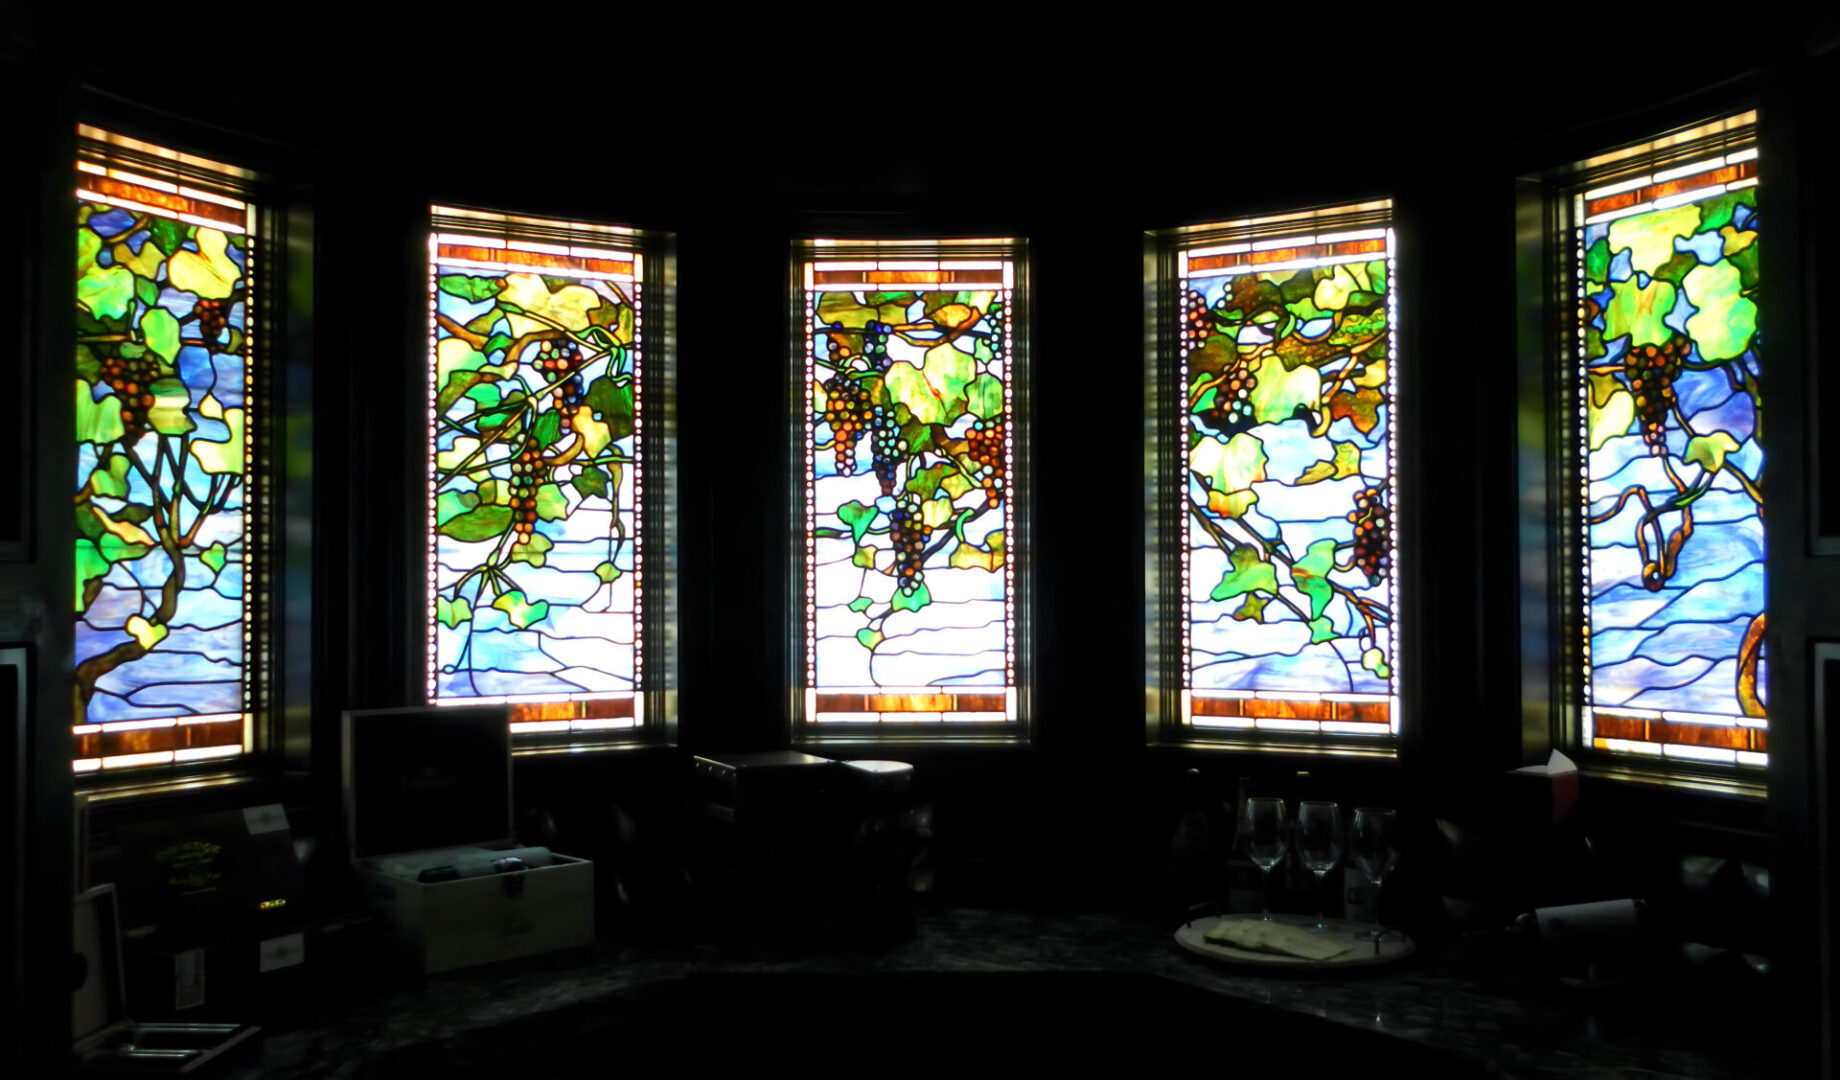 Three stained glass windows depicting trees and possibly grapevines, casting colorful light into a darkened room.